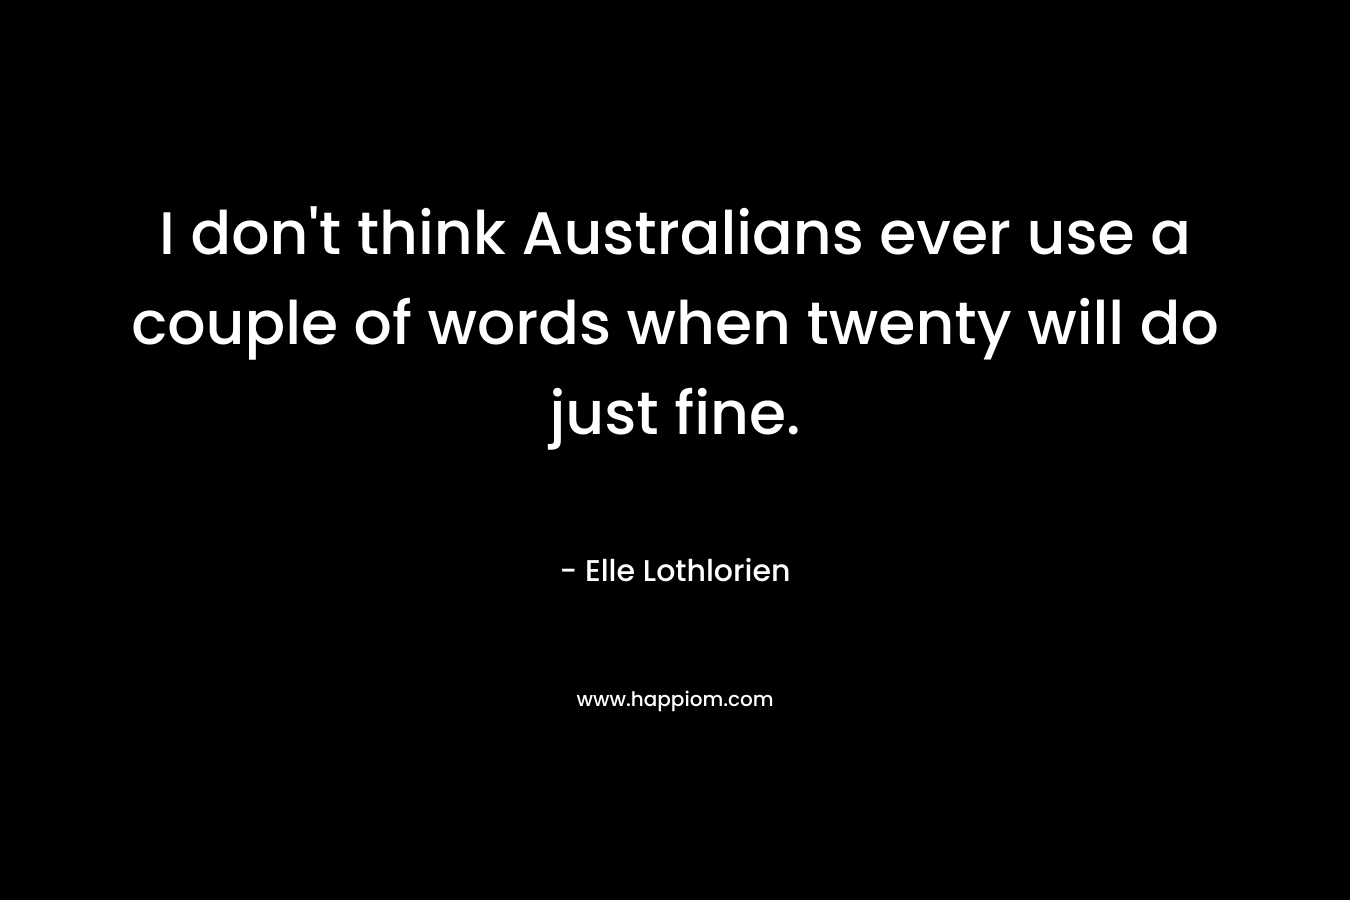 I don’t think Australians ever use a couple of words when twenty will do just fine. – Elle Lothlorien